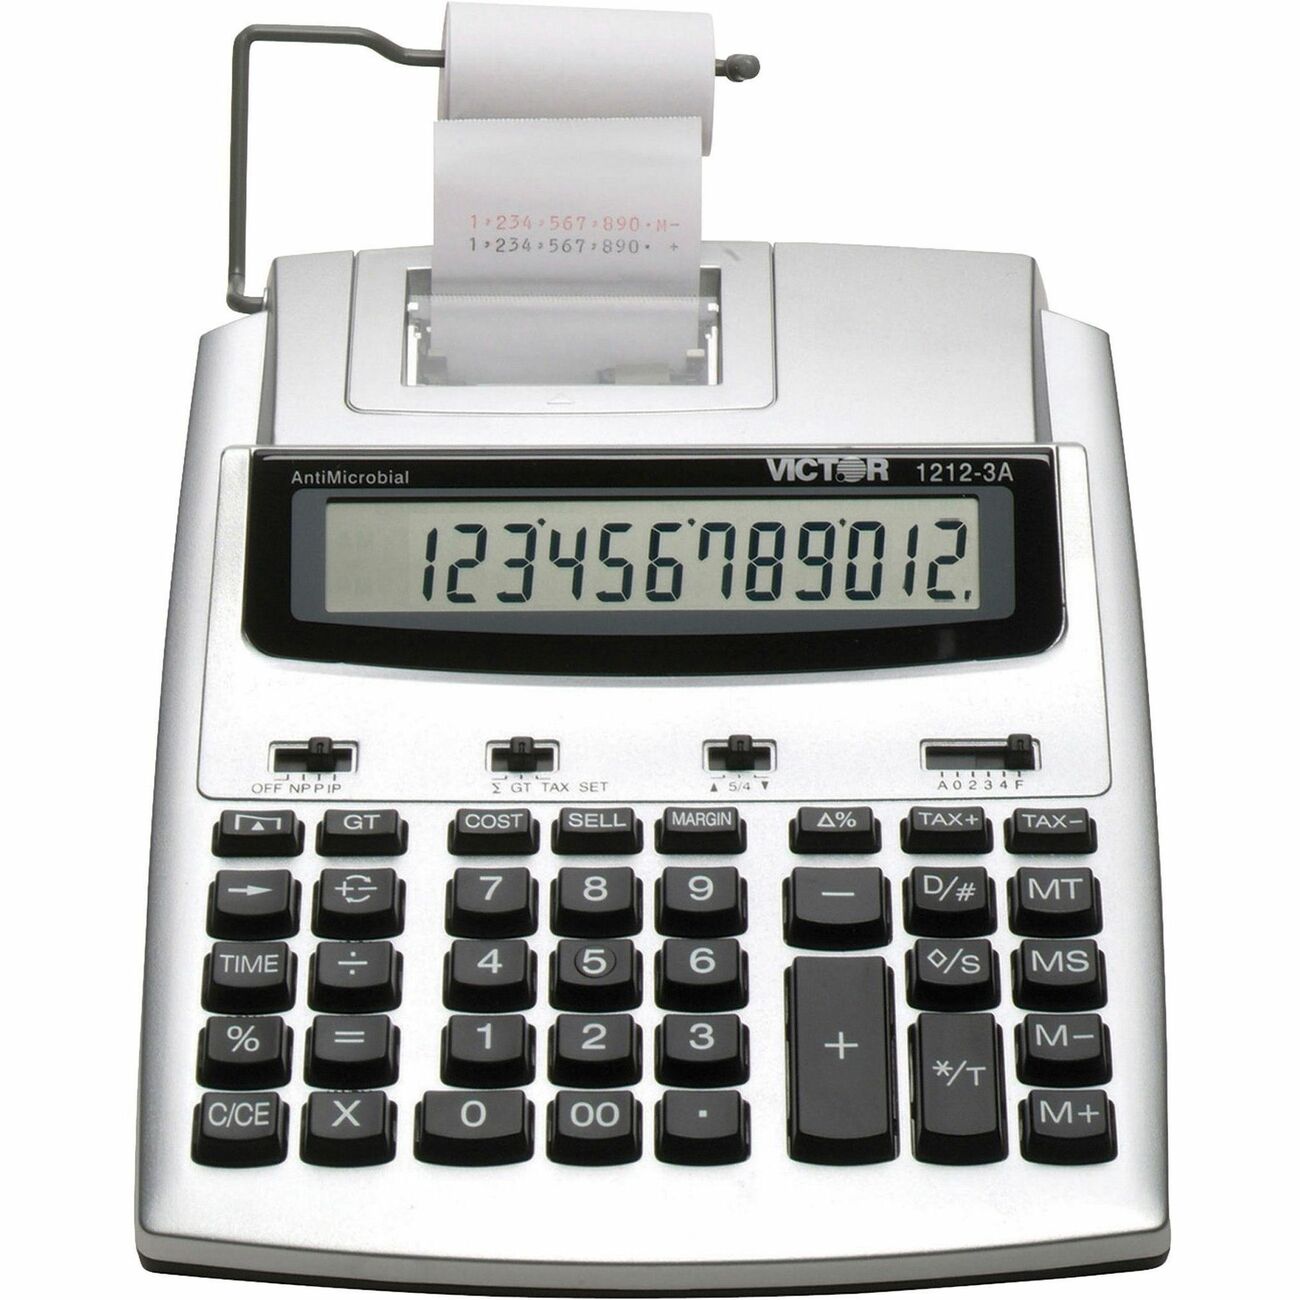 Victor 12123A Printing Calculator Extra Large Display, Date, Clock,  Environmentally Friendly, Item Count, 4-Key Memory, Independent Memory,  Dual Power Battery/Power Adapter Powered 2.5